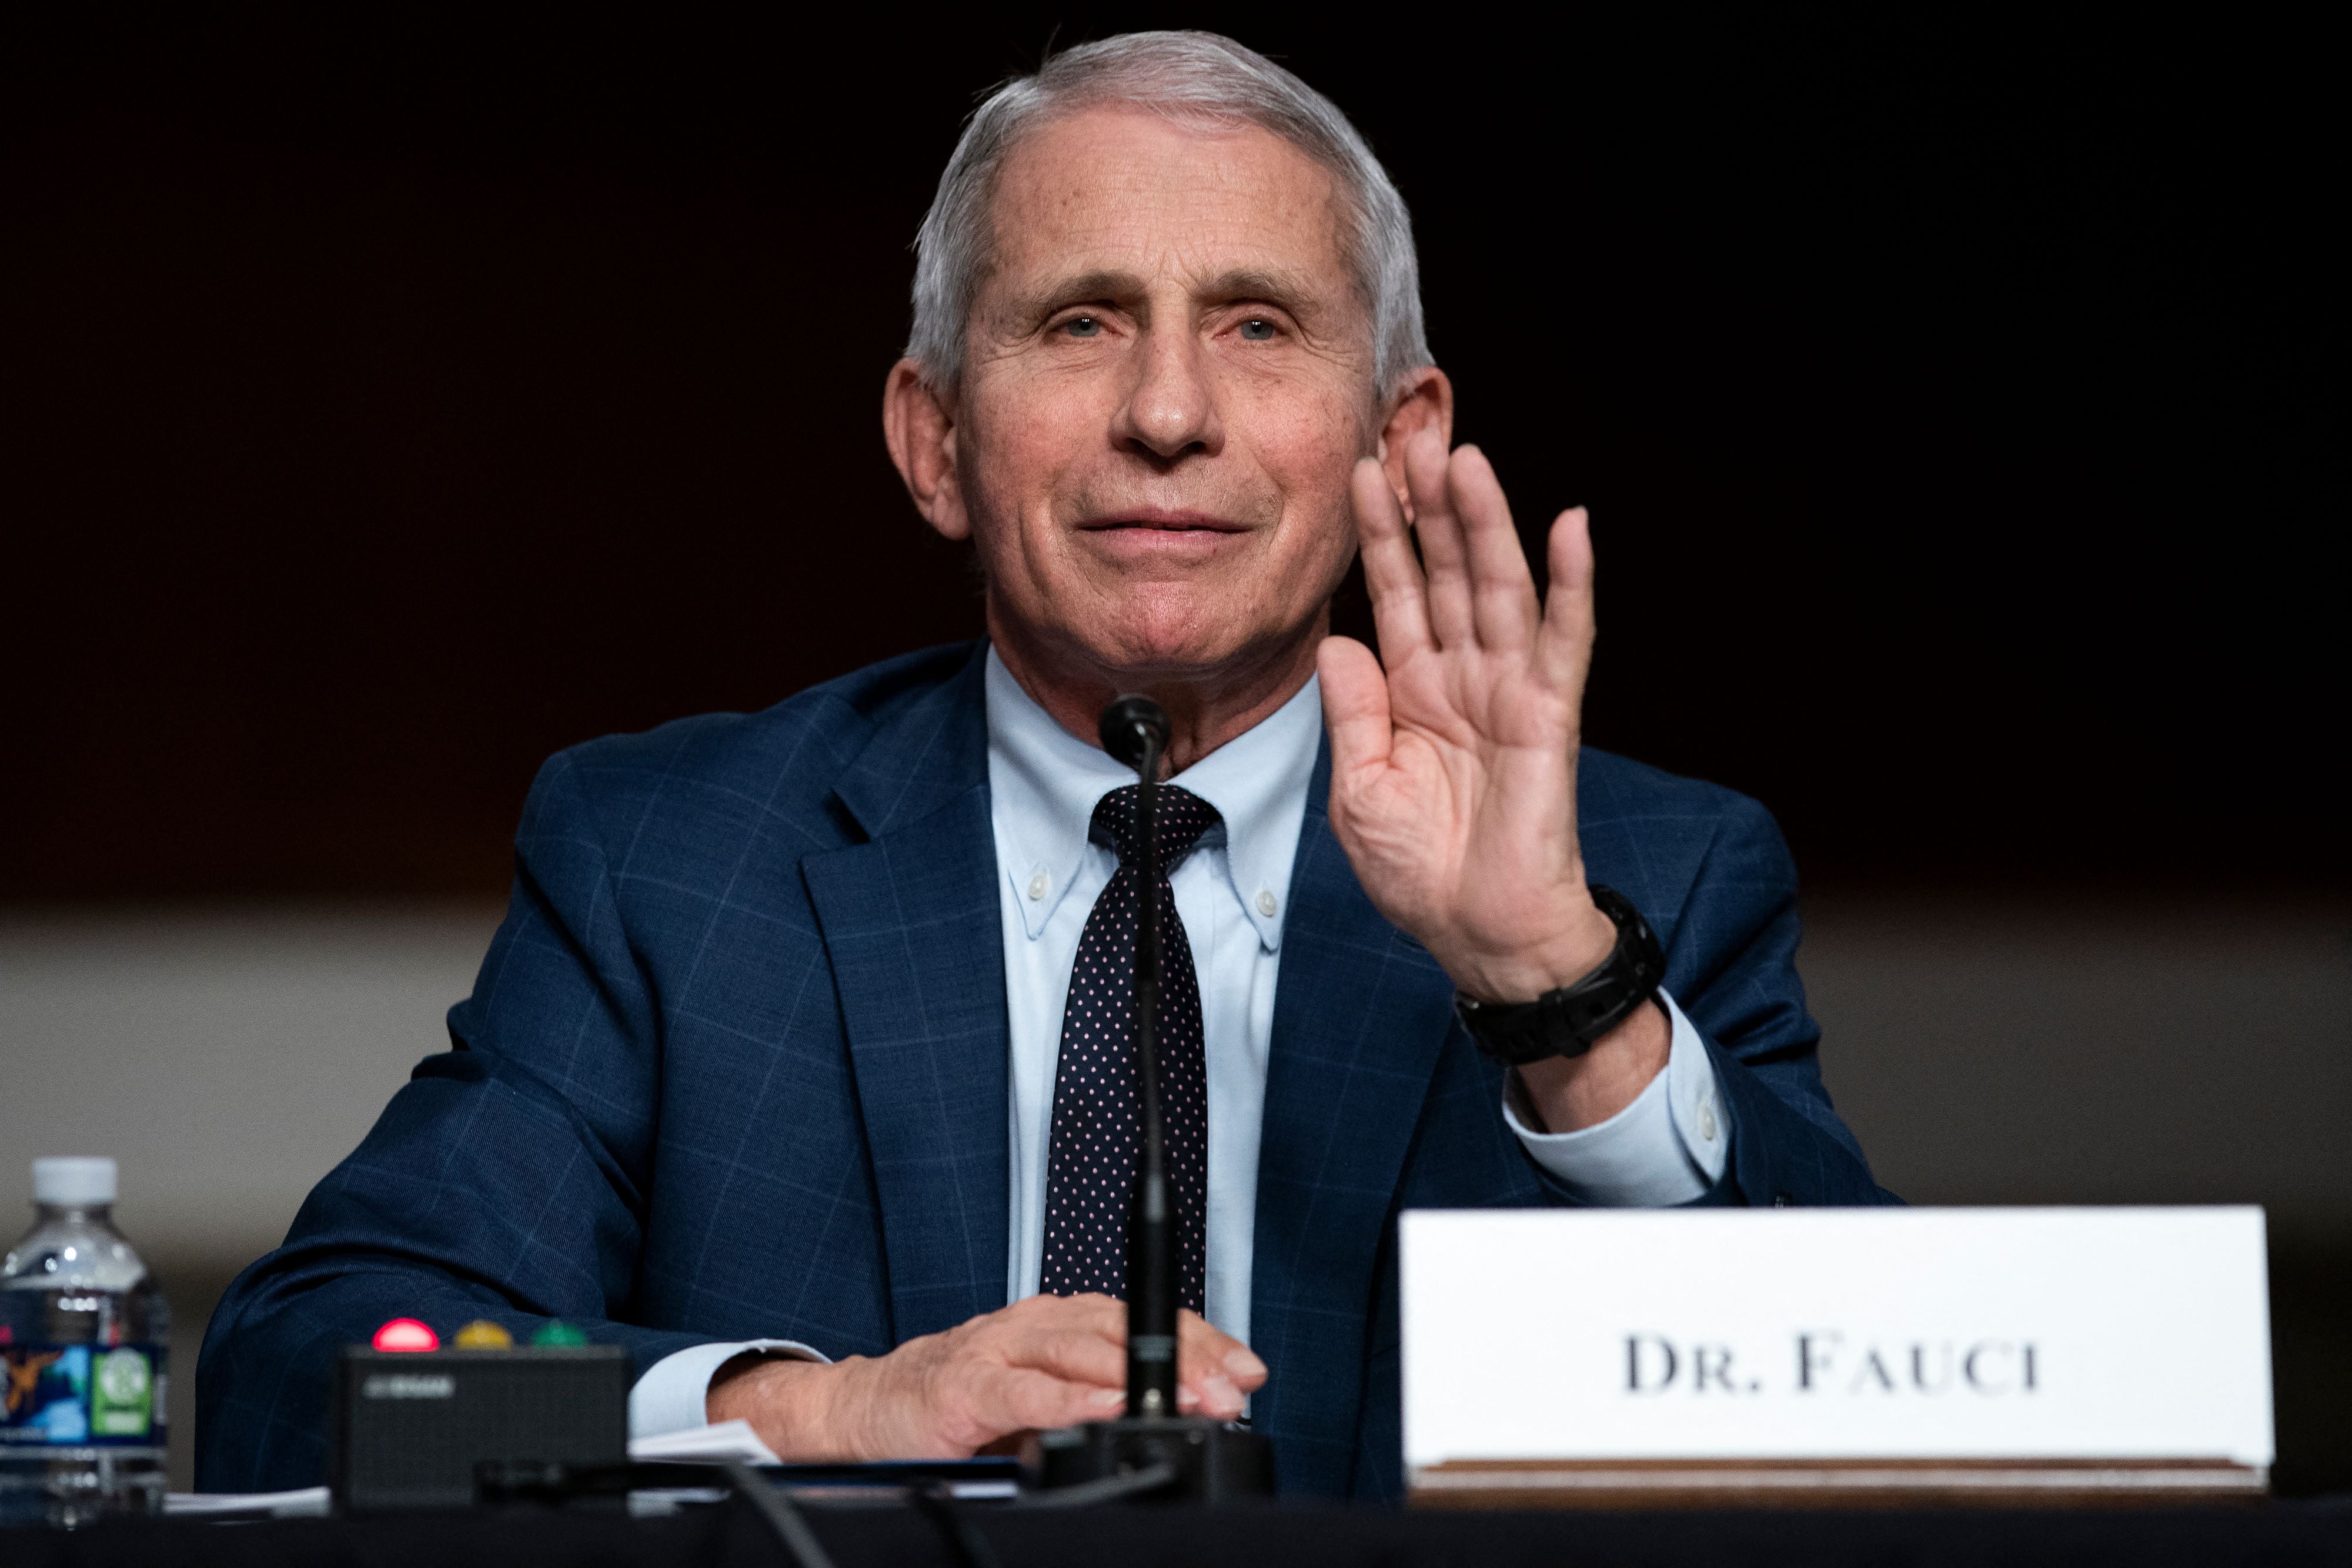 Anthony Fauci, White House chief medical adviser and director of the NIAID, during a Senate Health, Education, Labour and Pensions Committee hearing on 11 January 2022